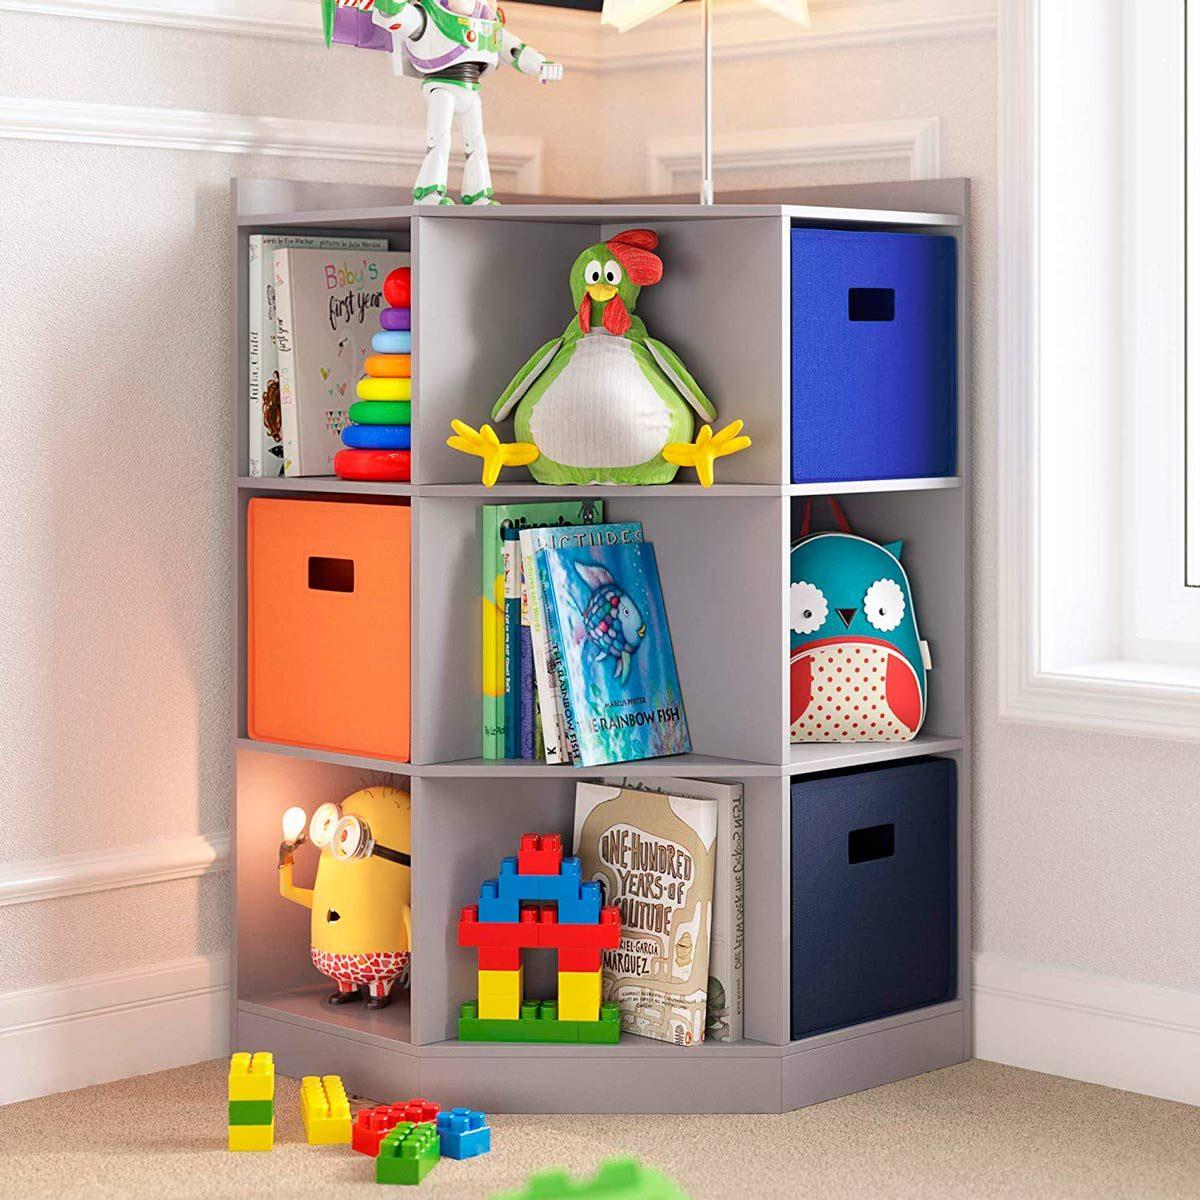 Kids Bedroom Storage: 7 Tips to Help Your Children Stay Organized